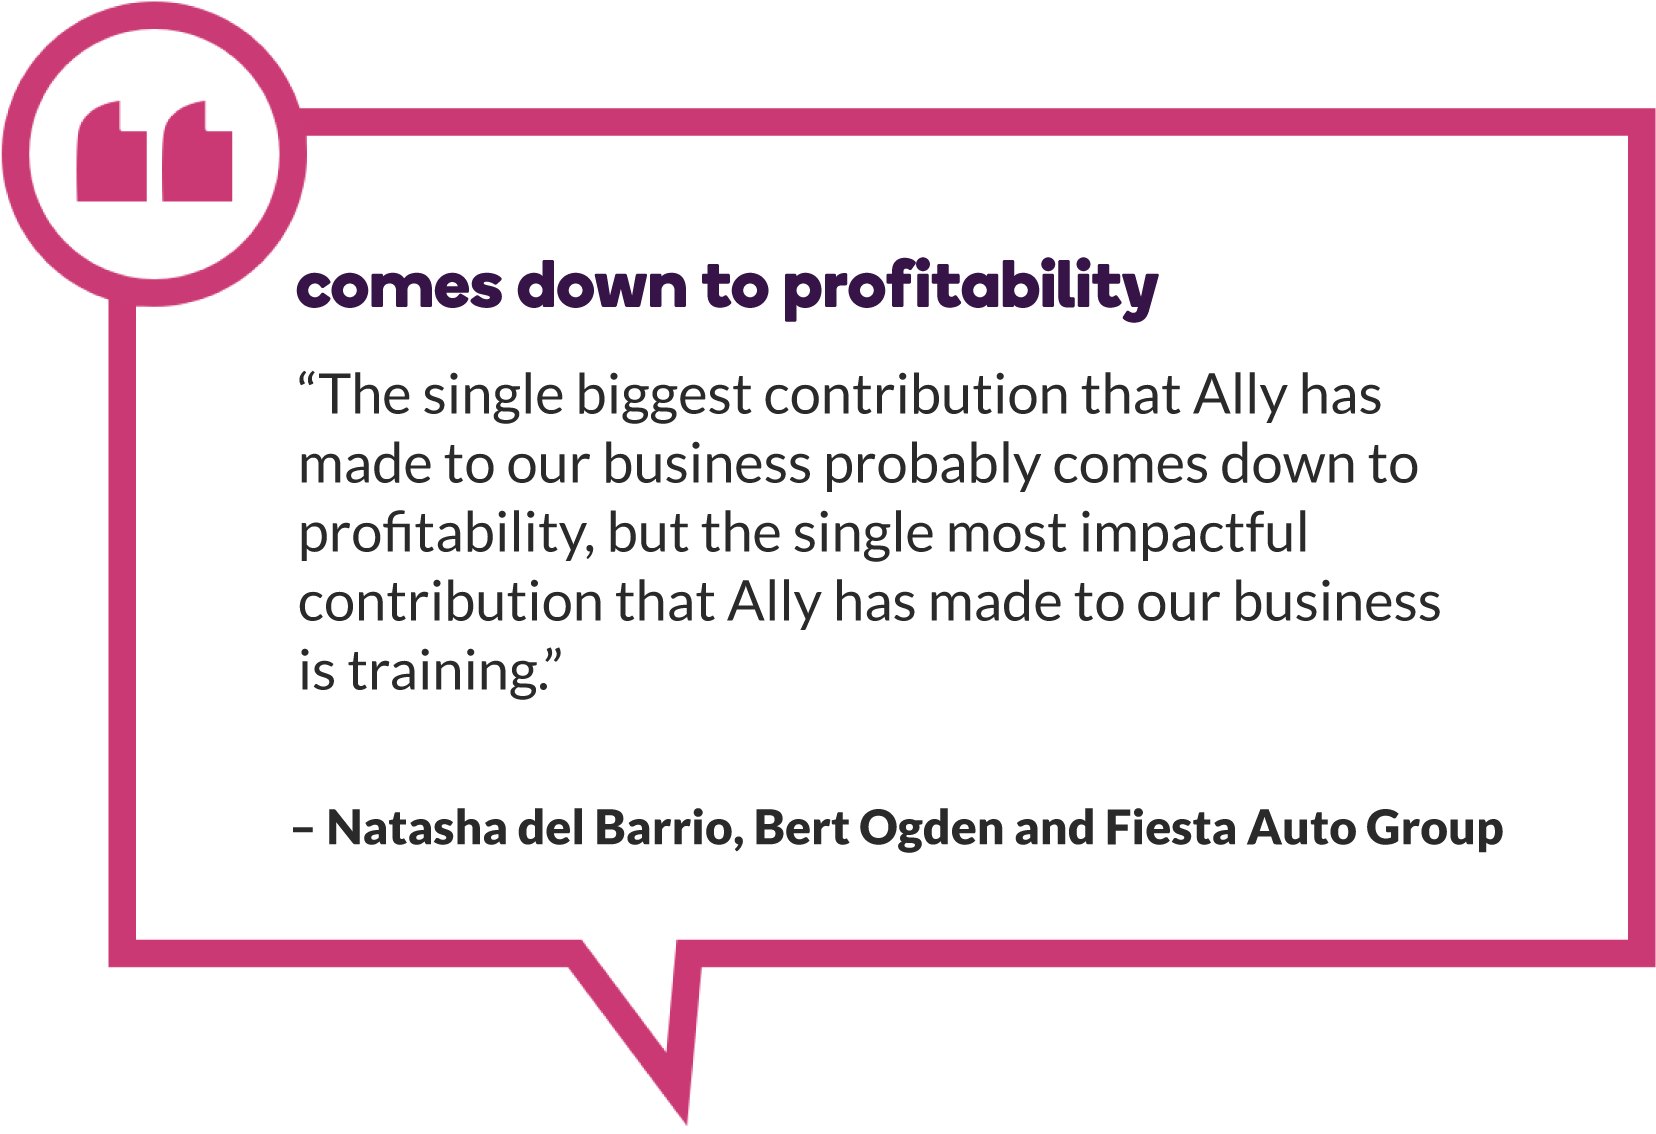 Natasha del Barrio of Bert Ogden and Fiesta Auto Group says, “The single biggest contribution that Ally has made to our business probably comes down to profitability, but the single most impactful contribution that Ally has made to our business is training.”